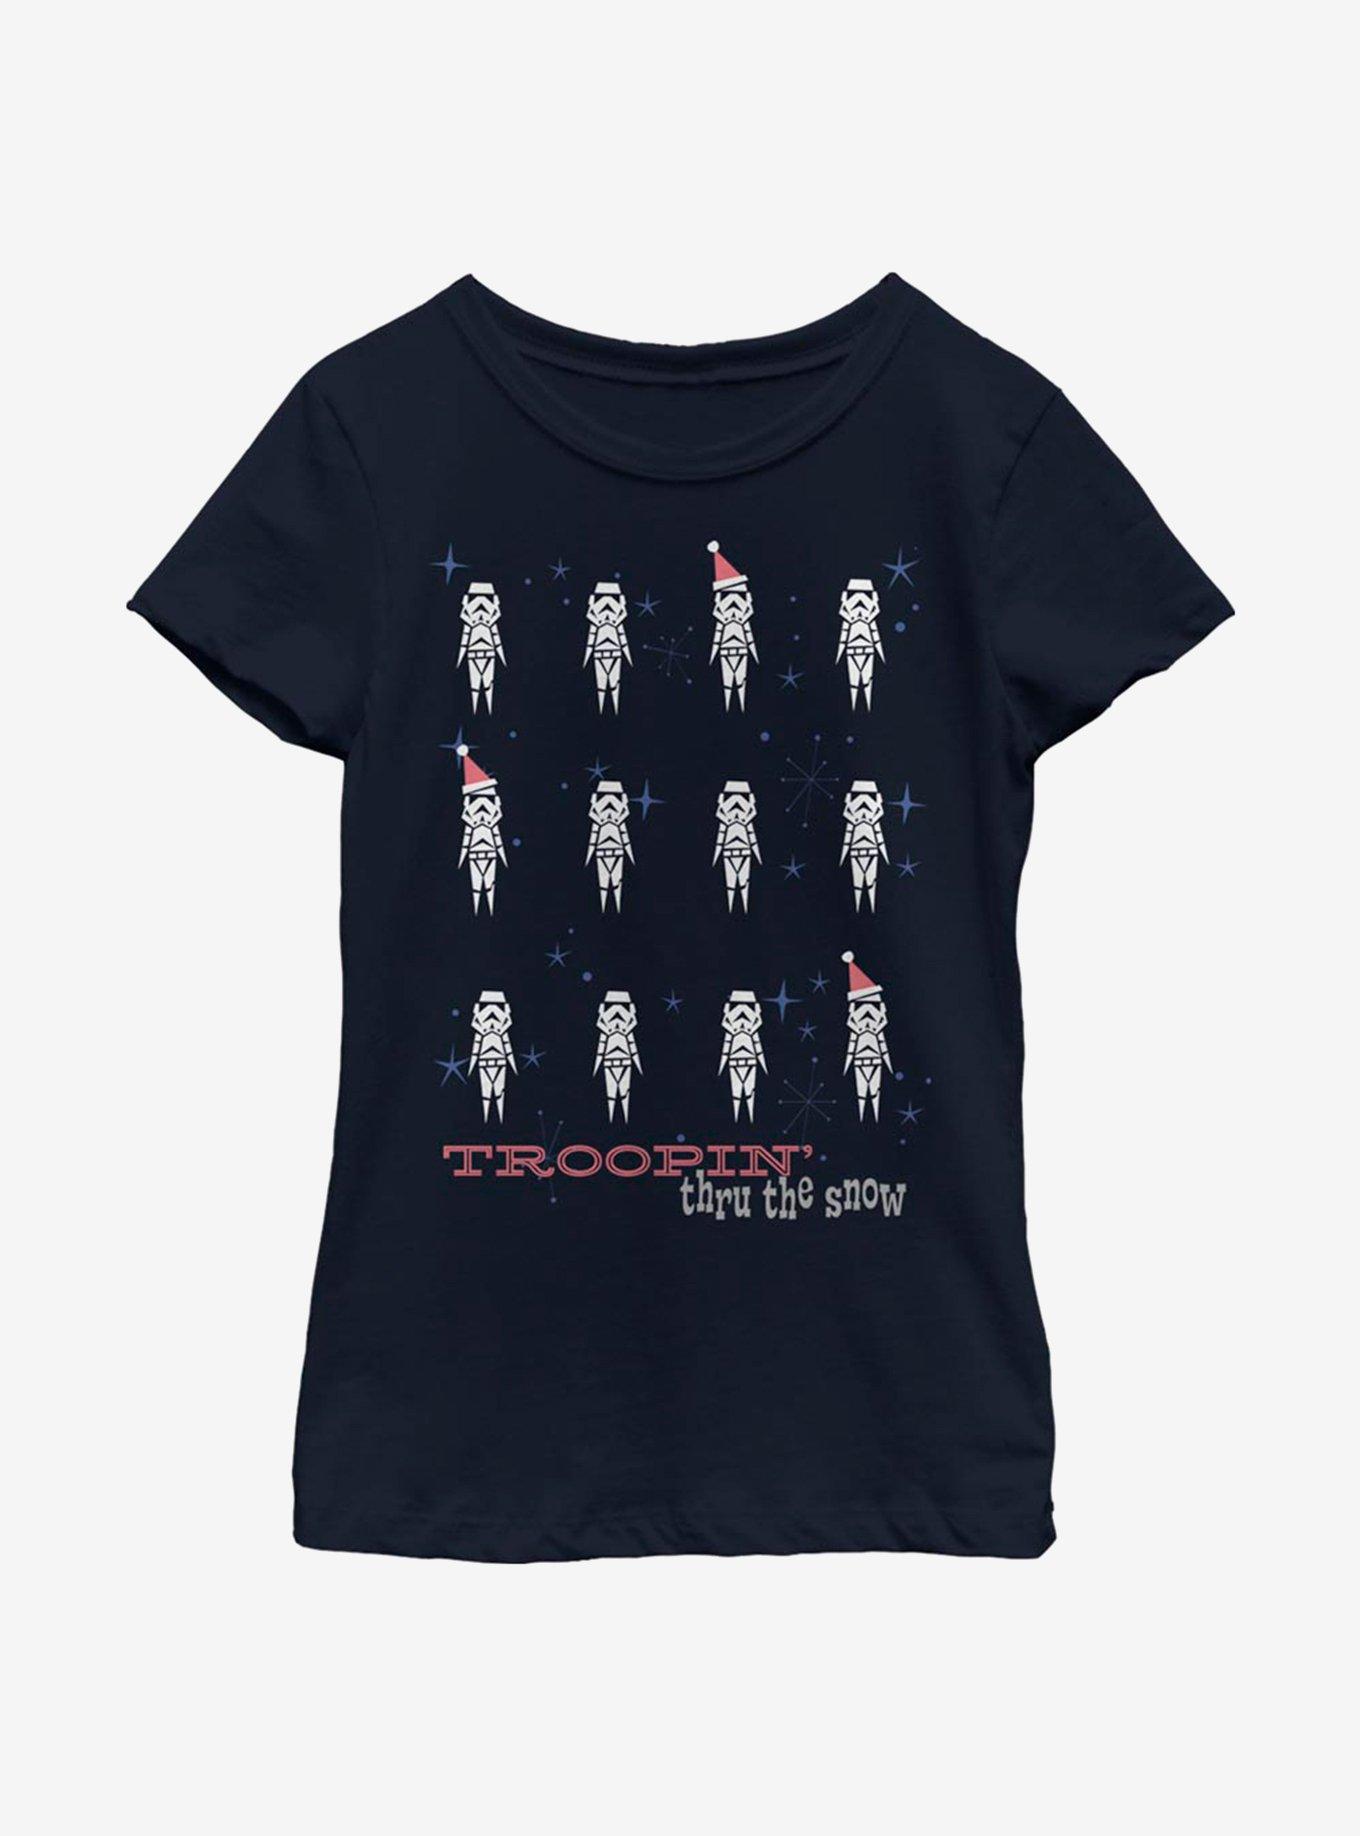 Star Wars Snow Troopers Youth Girls T-Shirt, NAVY, hi-res